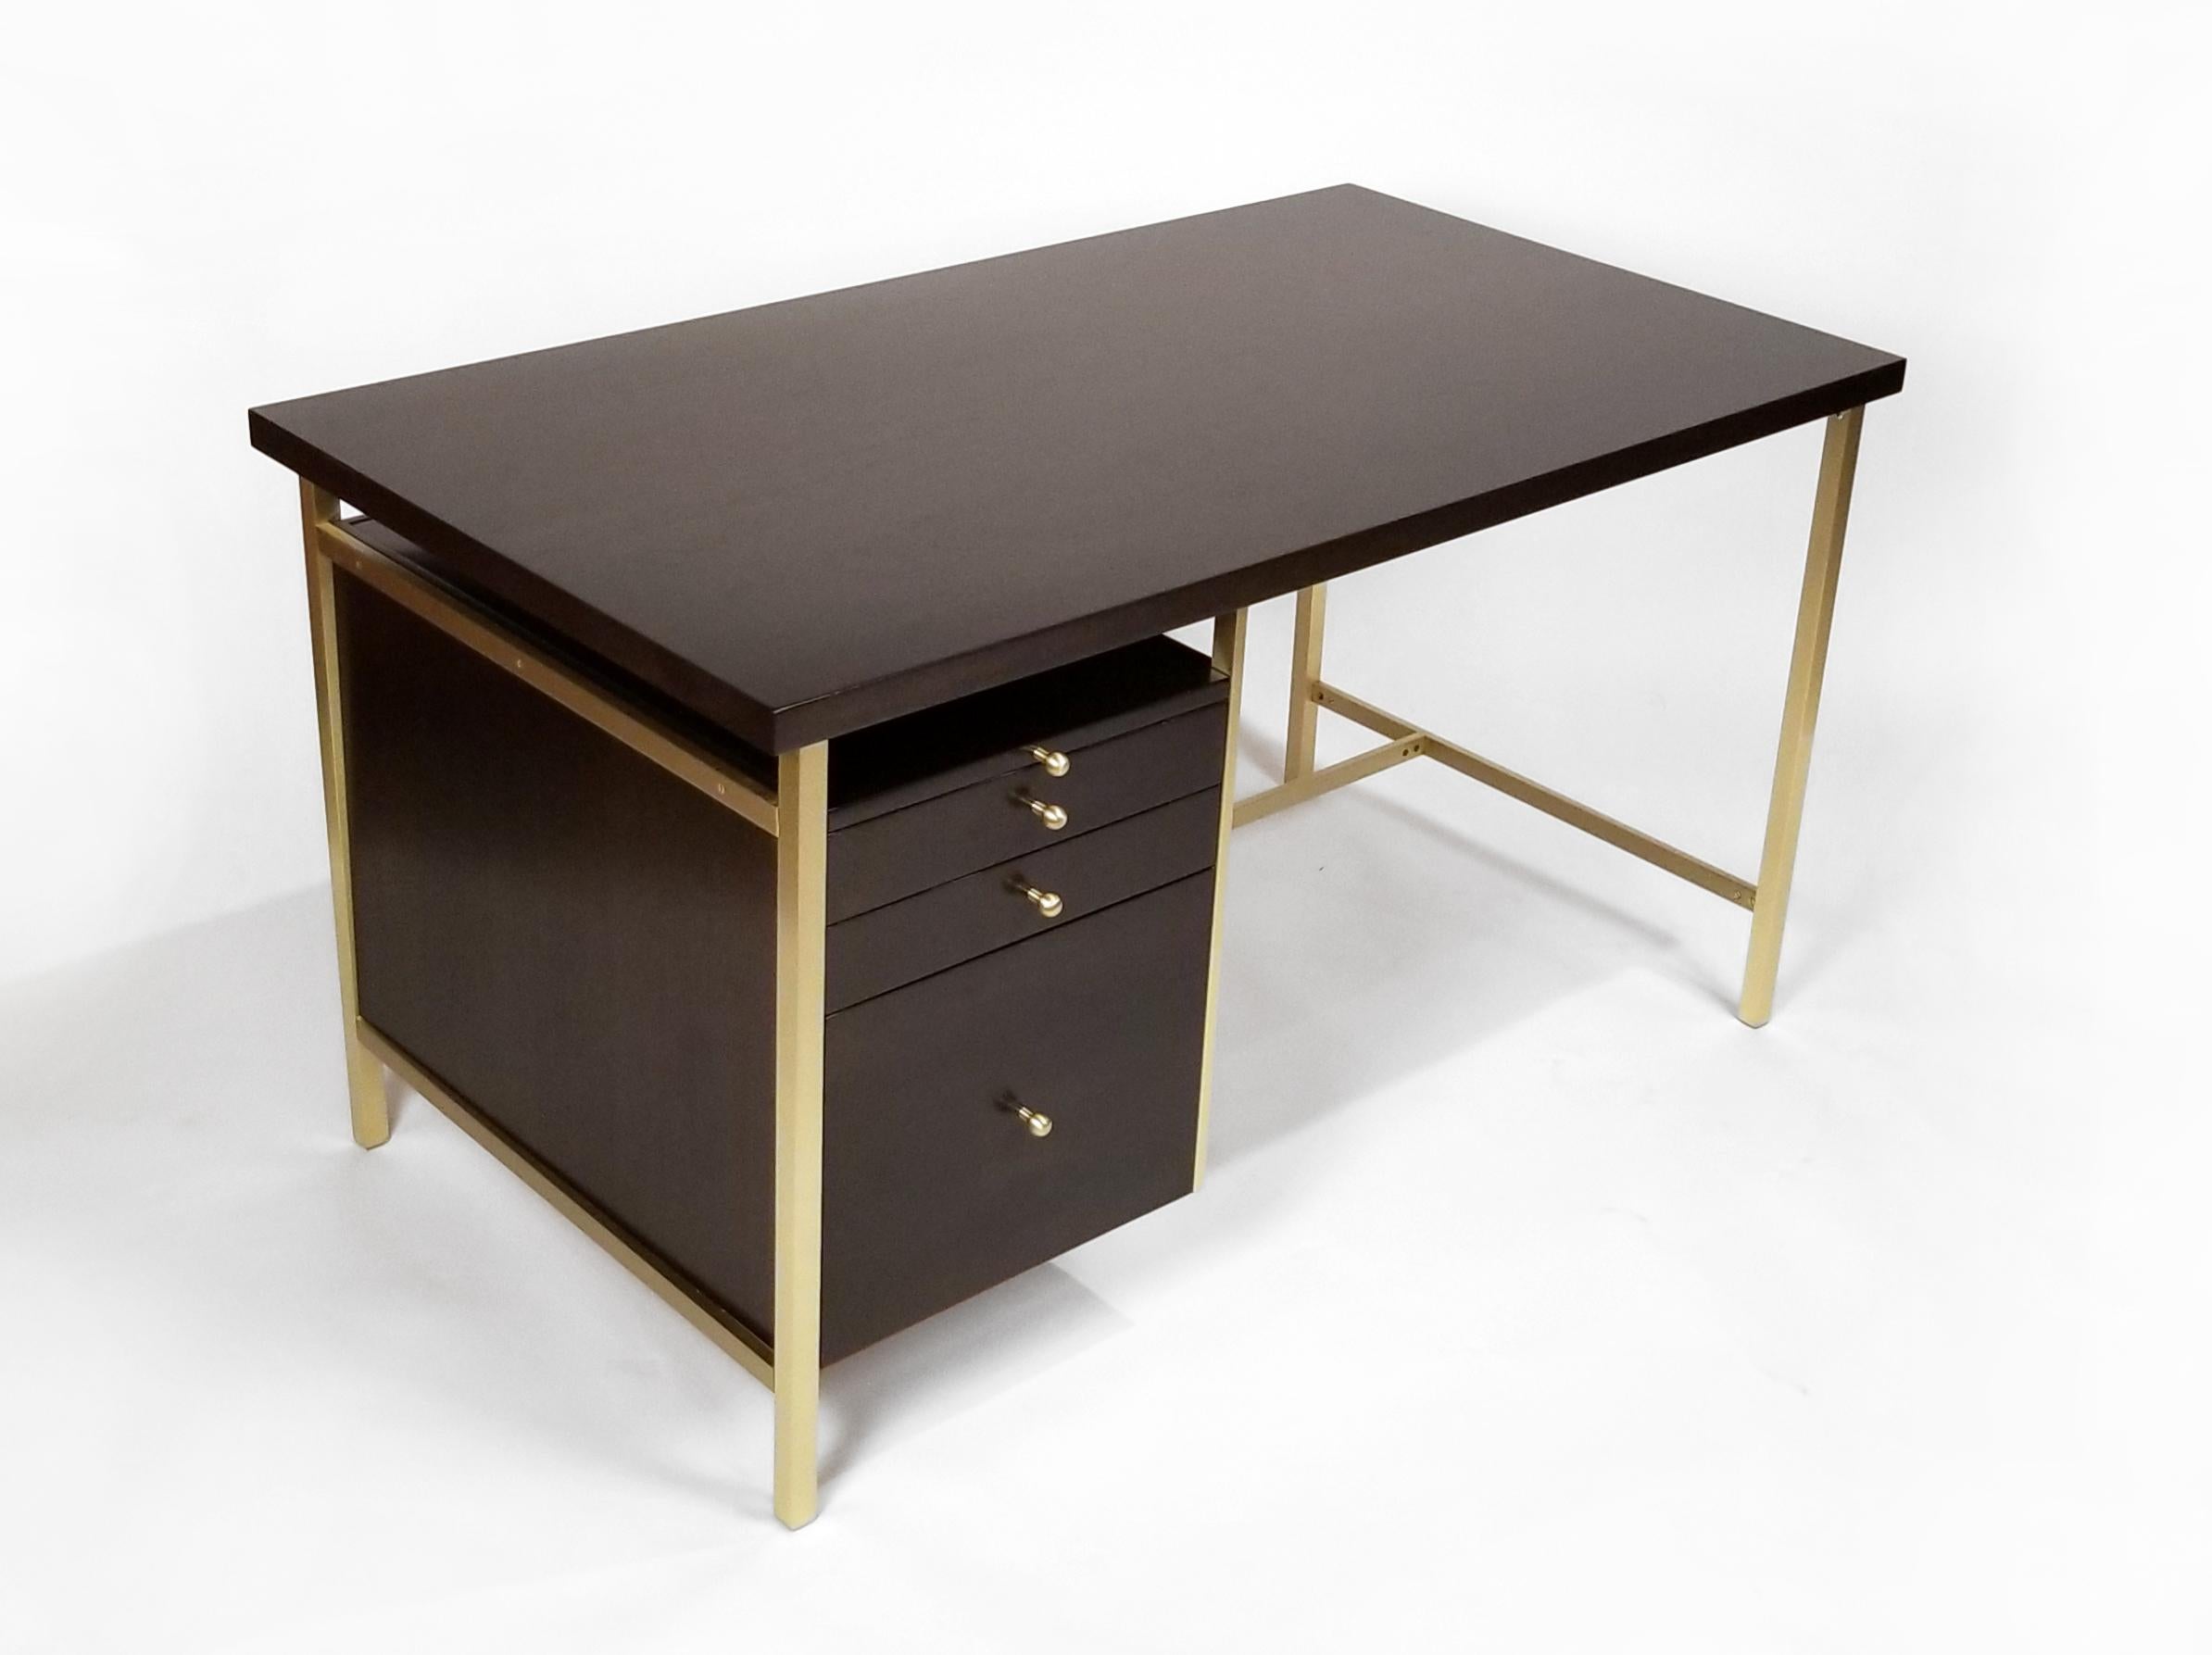 This exquisitely crafted desk was designed by Paul McCobb with a Minimalist aesthetic for his Connoisseur collection. This upscale series was produced by H. Sacks and Sons in the 1960's. Exceptional condition. The top pull engages a slide-out